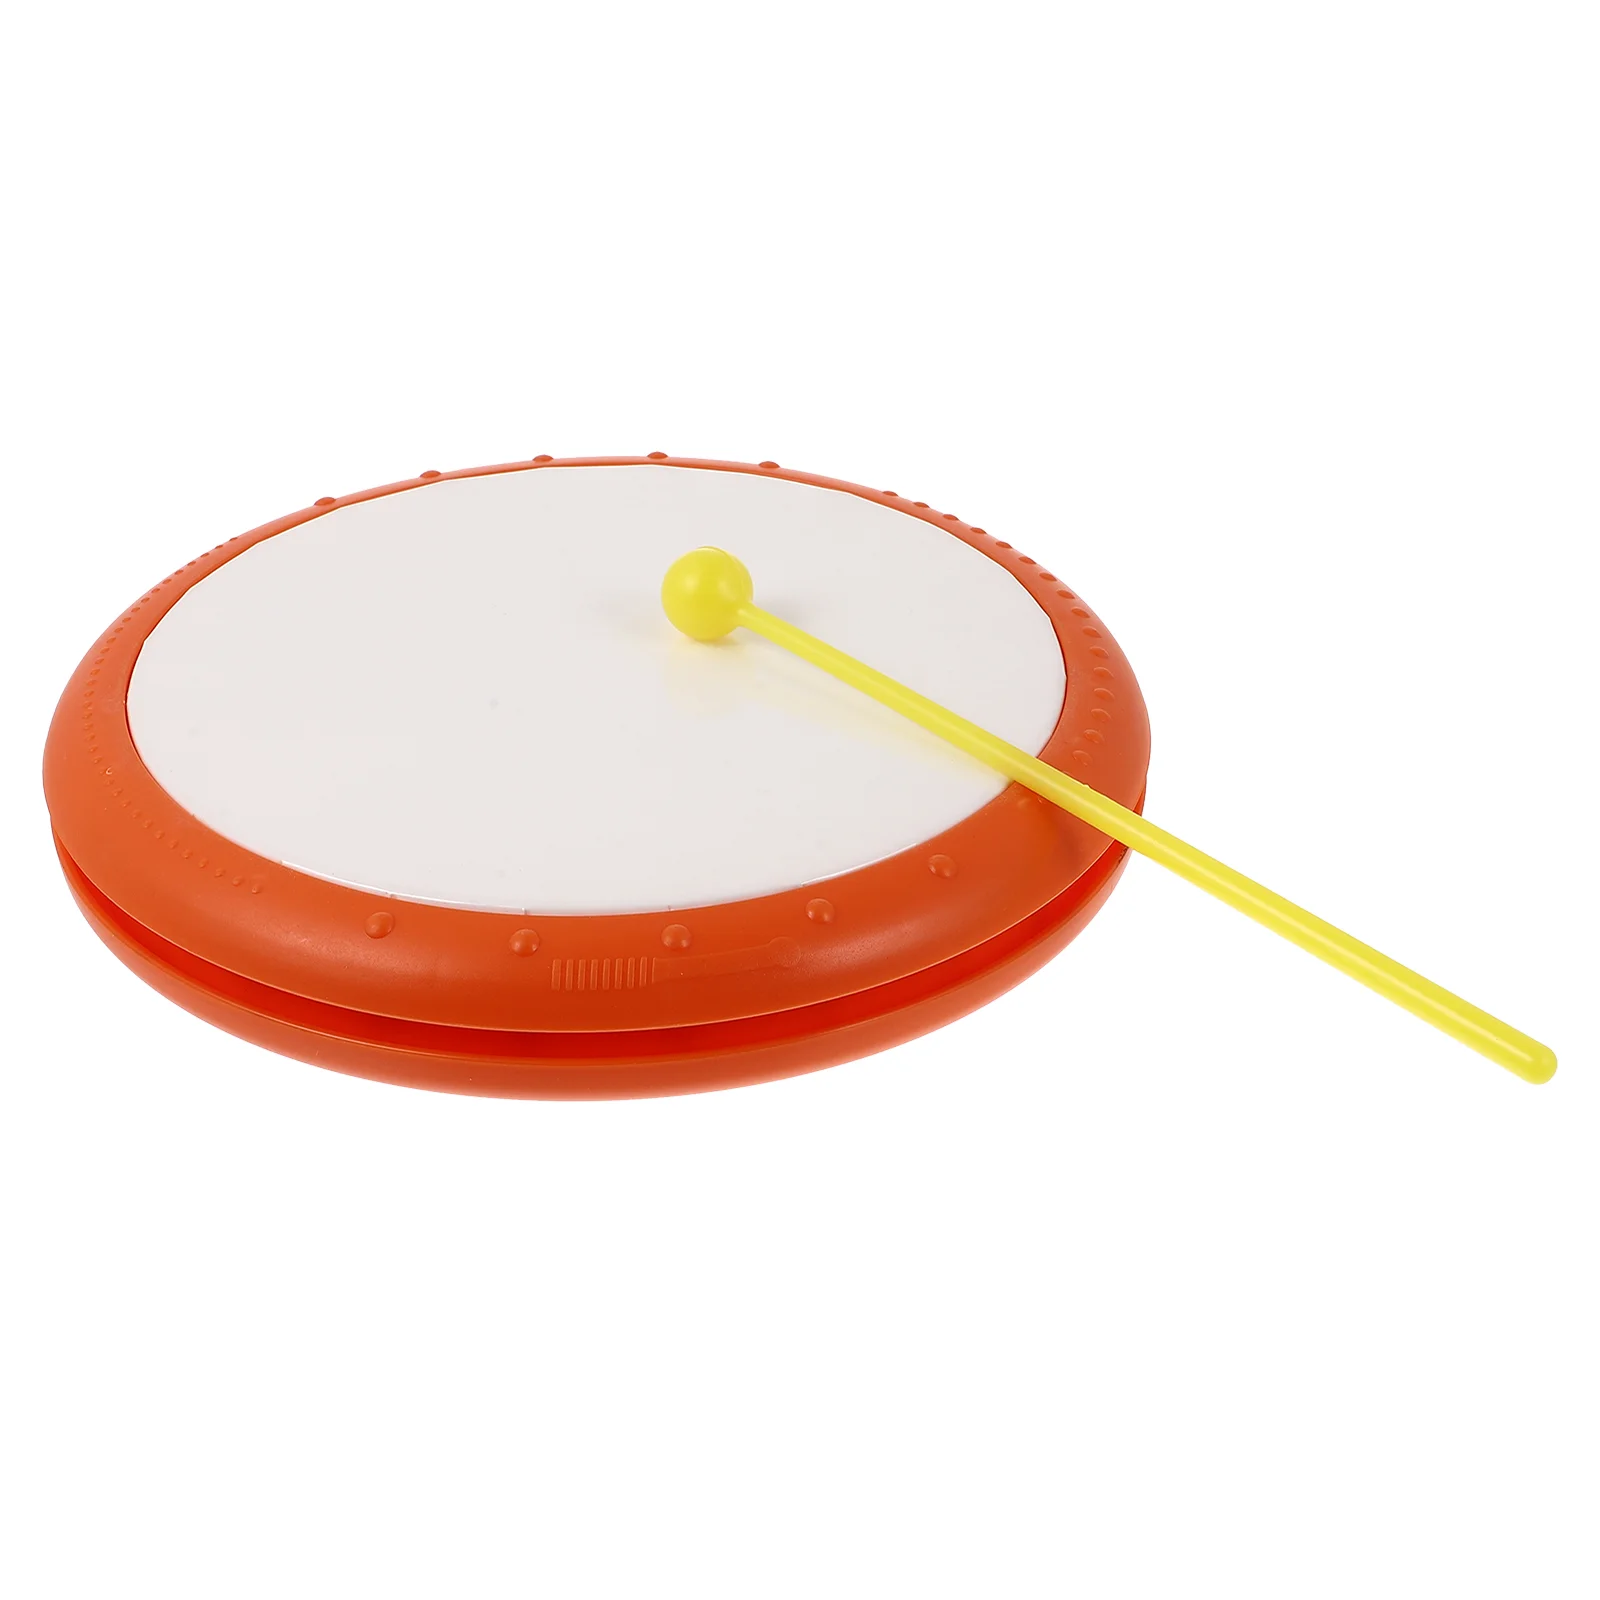 

Toy Drum Hand Pounding Percussion Musical Music Kids Toys Knock Early Instrument Piano Children Bench Hammer Xylophone